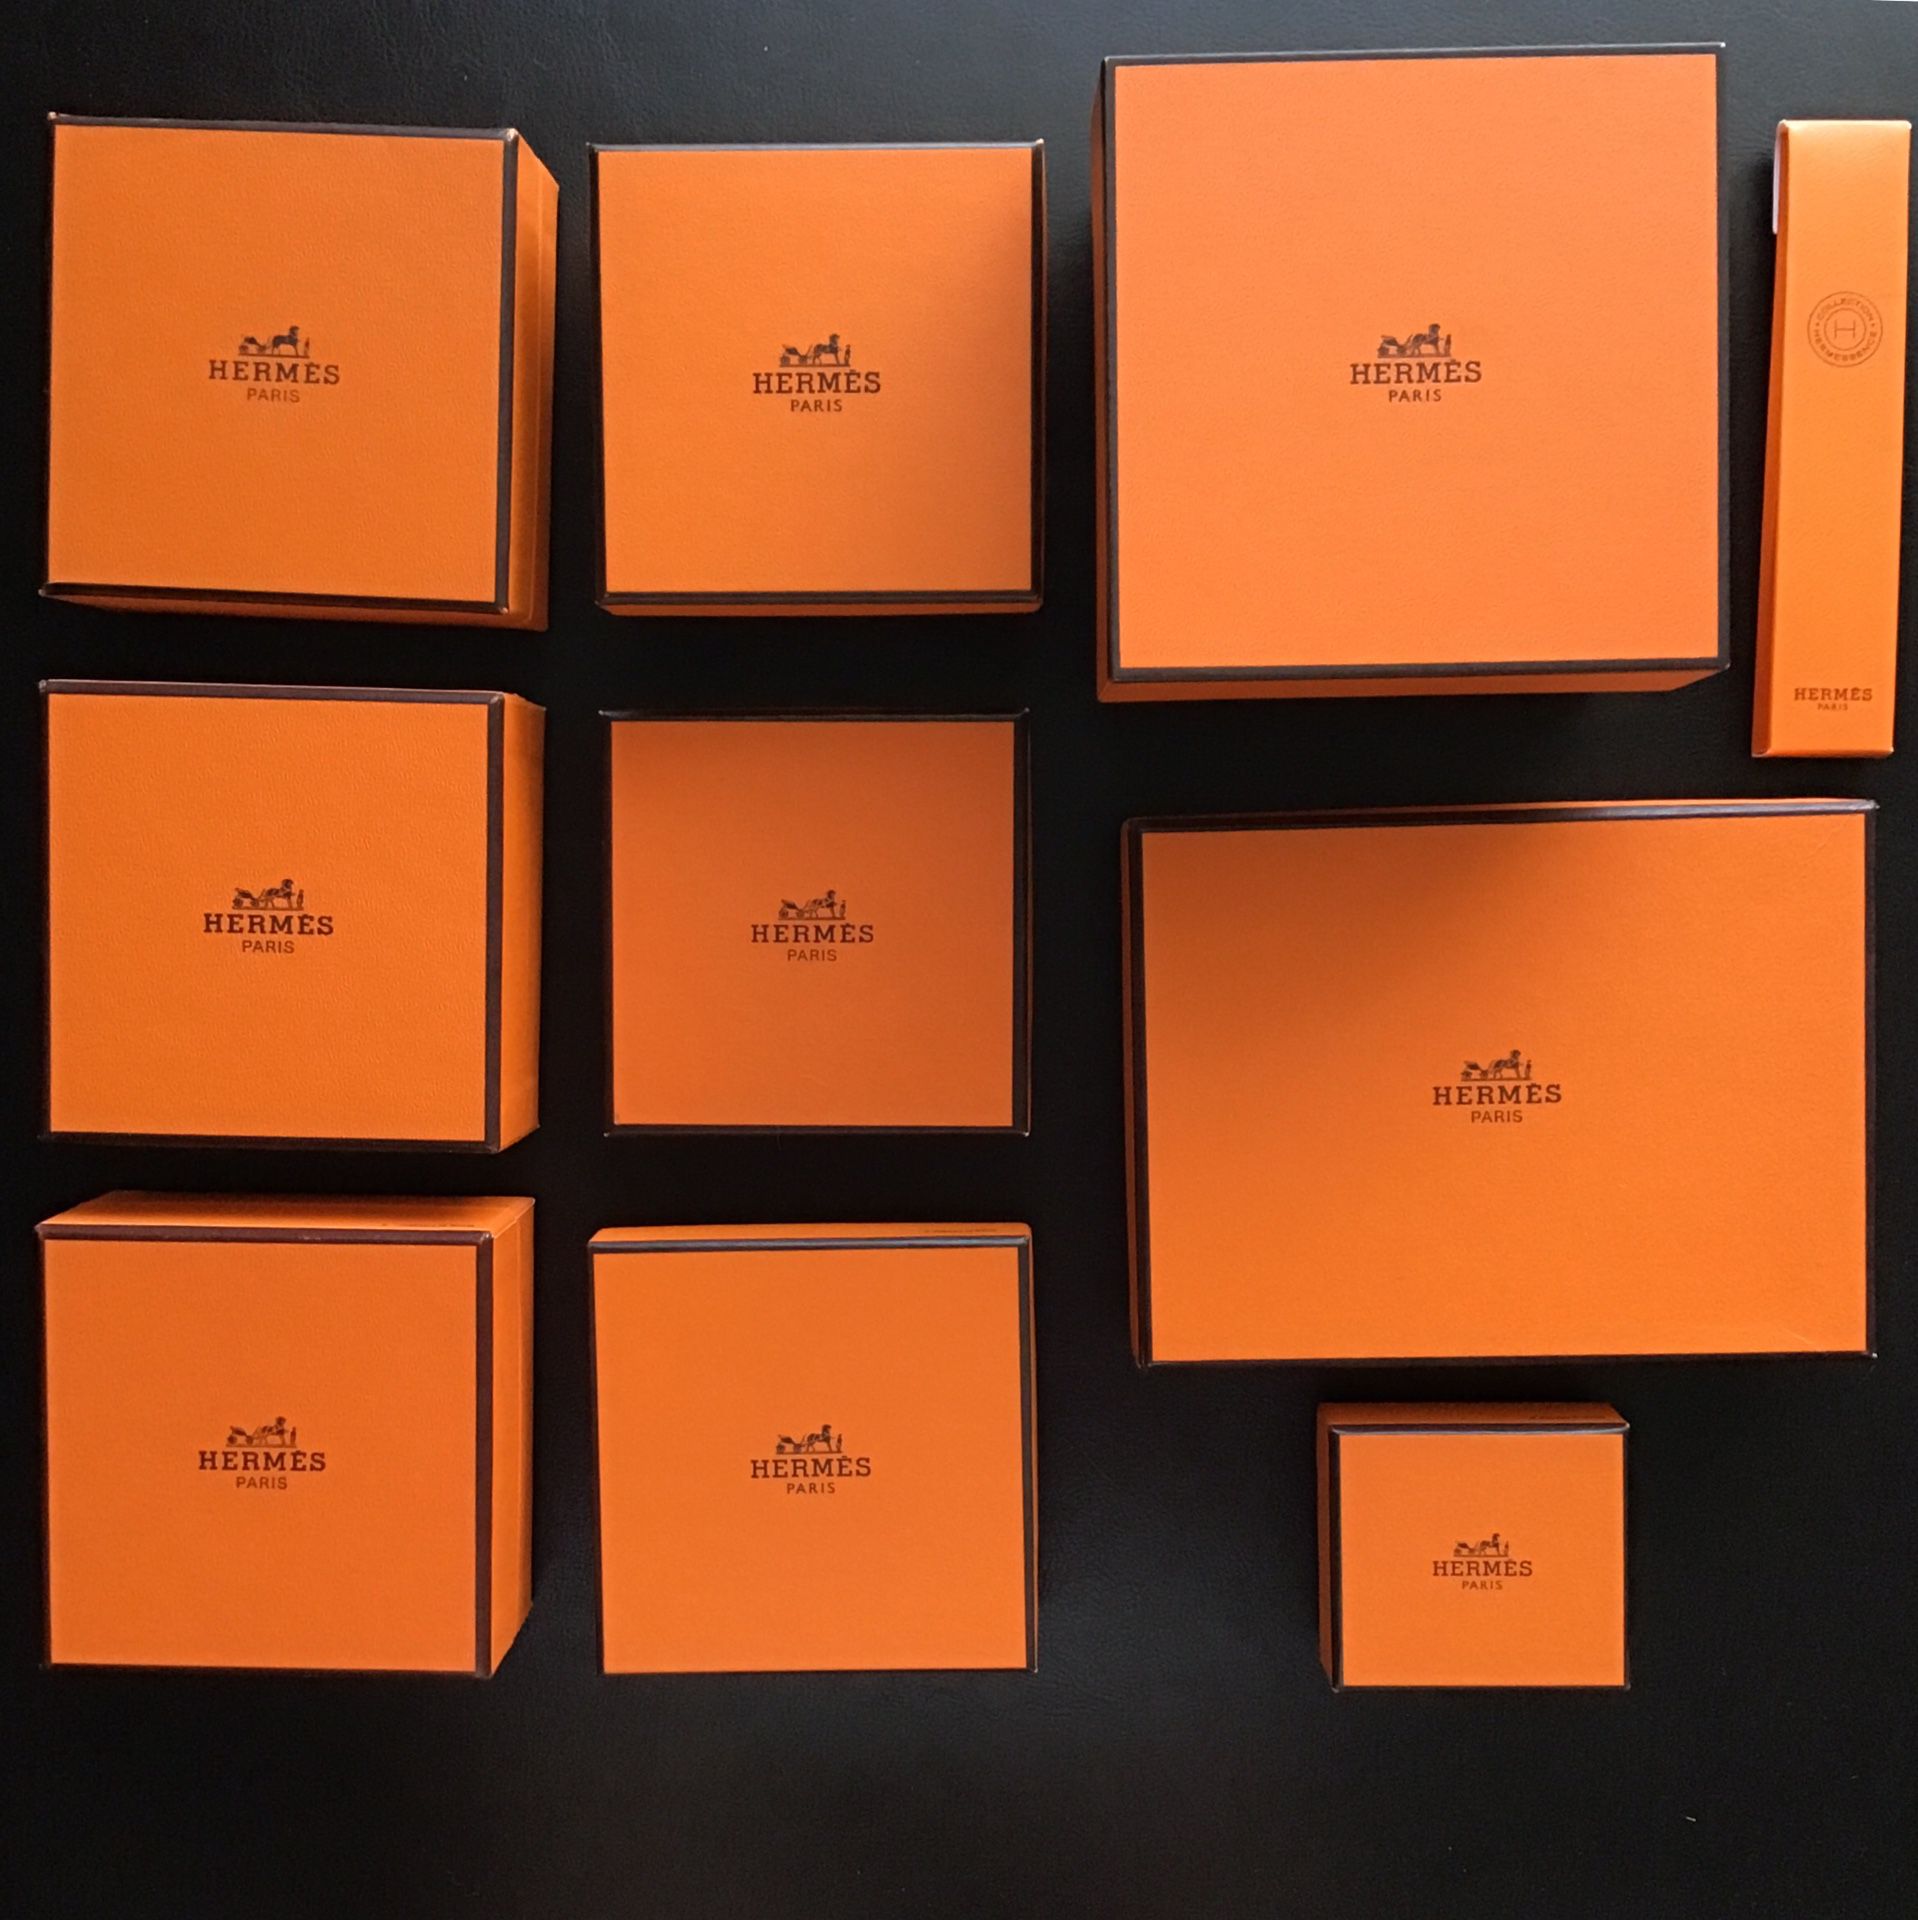 Authentic Hermès of Paris empty gift boxes and shopping bags for accessories in various sizes